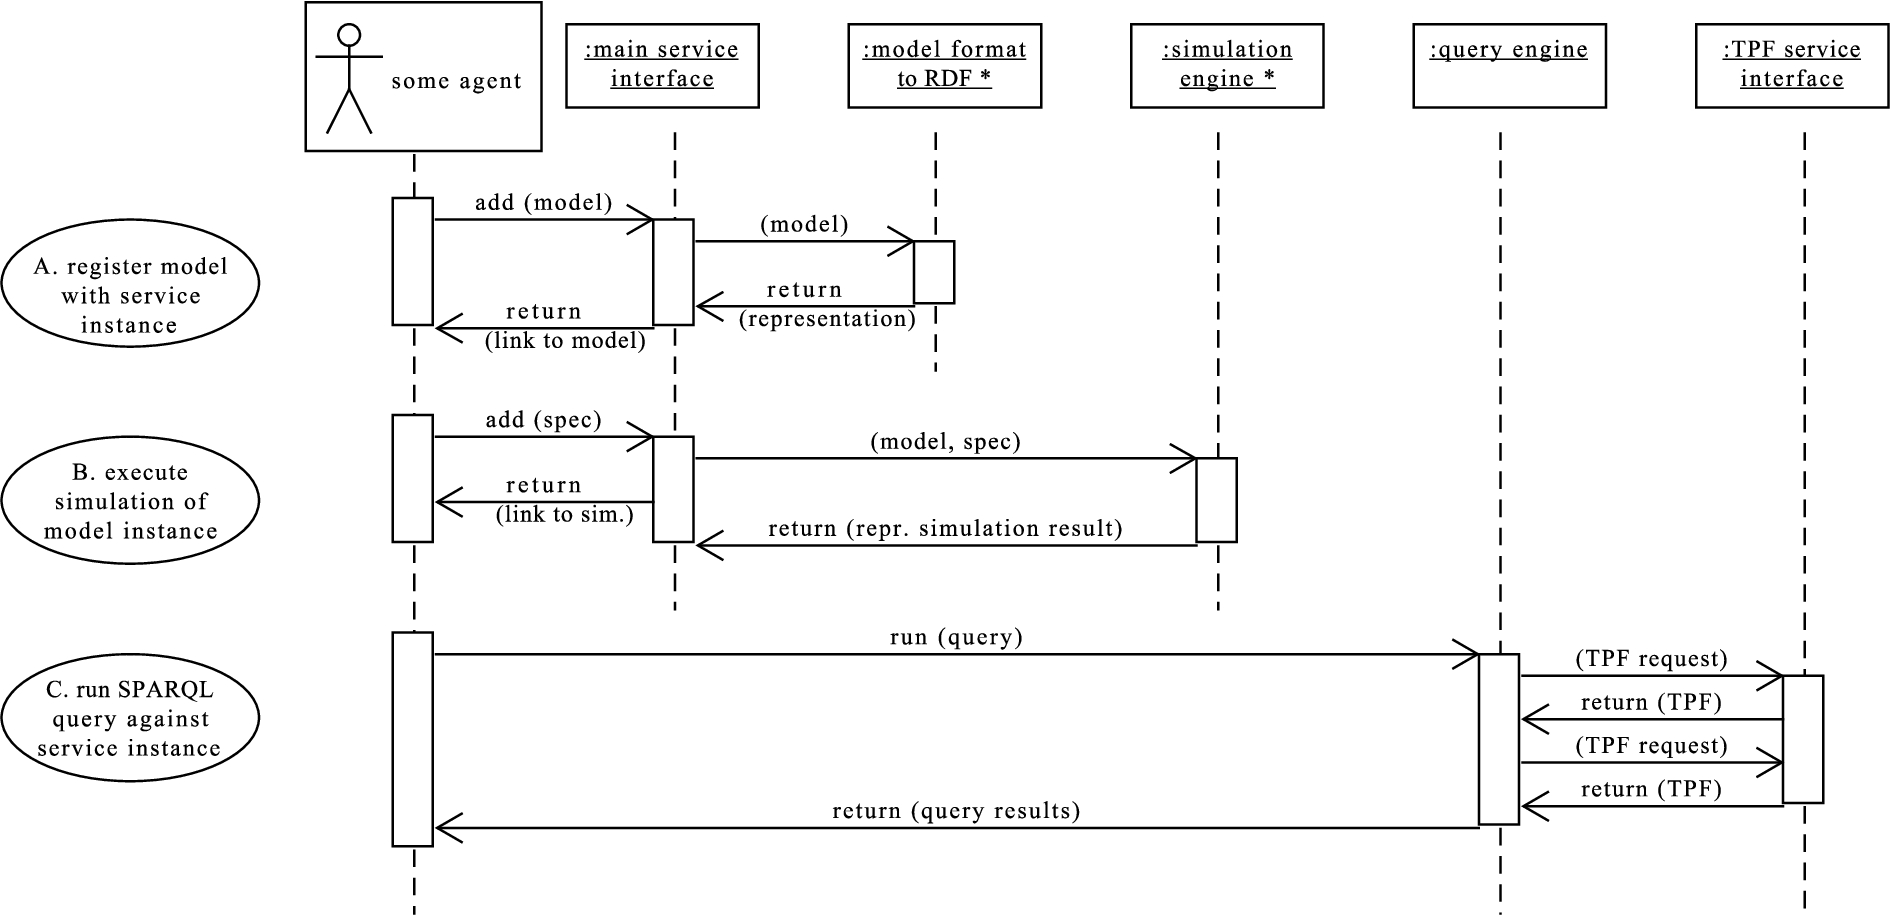 High-level sequence diagram for three main use cases of the service. Objects marked with an asterisk are specific to a certain model format such as FMI 2.0 for co-simulation.